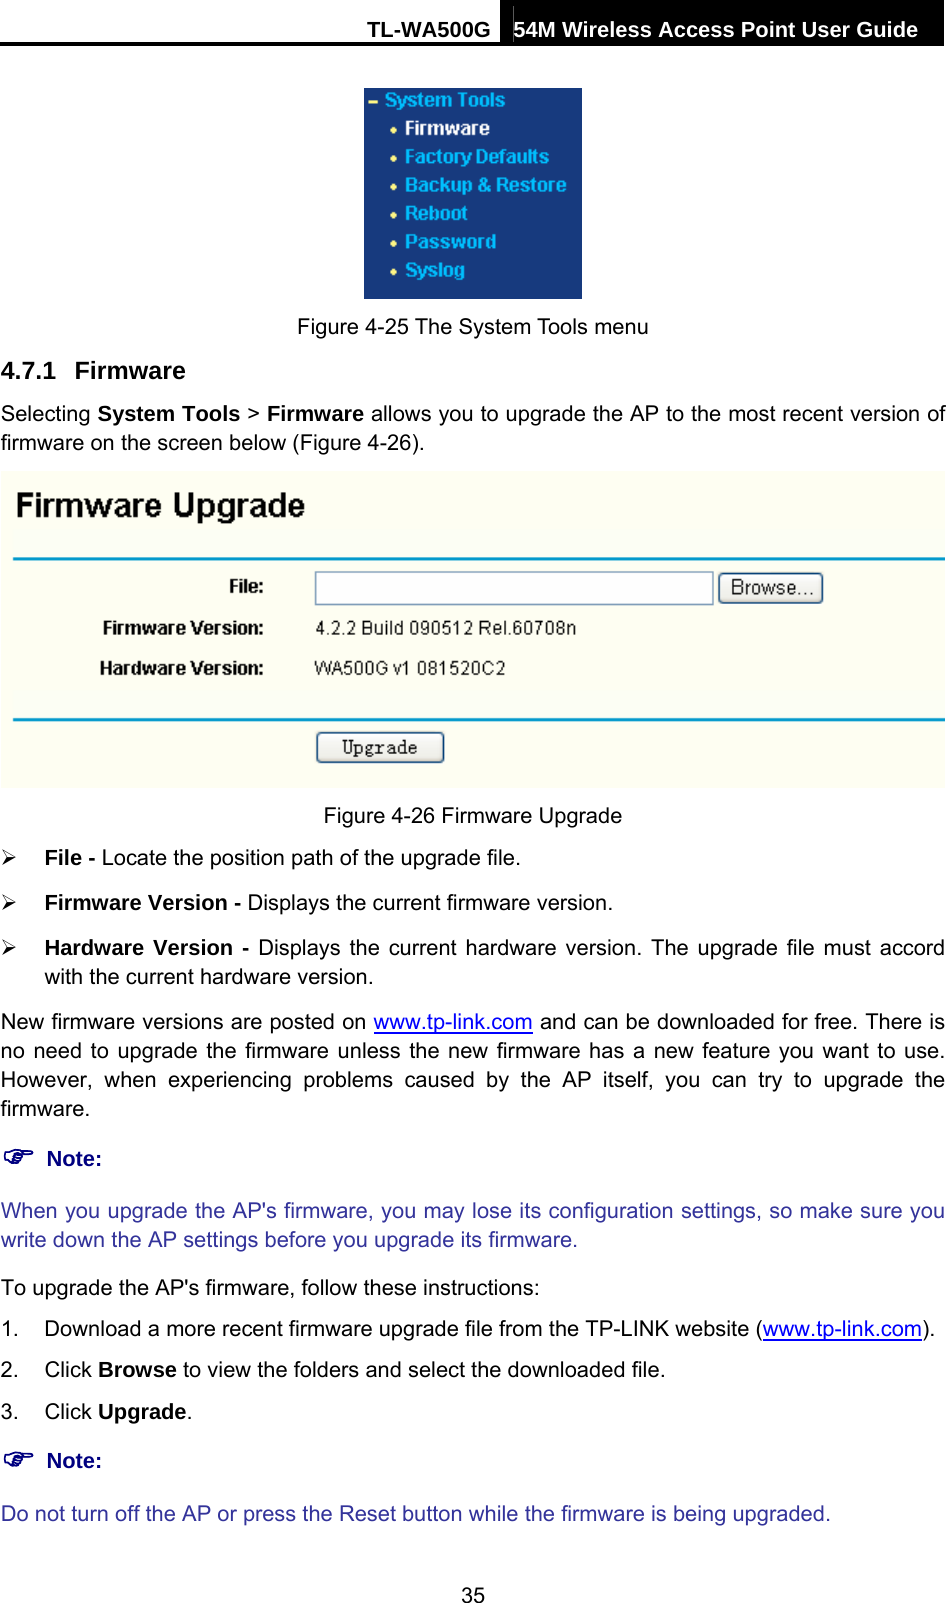 TL-WA500G 54M Wireless Access Point User Guide   Figure 4-25 The System Tools menu 4.7.1  Firmware Selecting System Tools &gt; Firmware allows you to upgrade the AP to the most recent version of firmware on the screen below (Figure 4-26).  Figure 4-26 Firmware Upgrade ¾ File - Locate the position path of the upgrade file. ¾ Firmware Version - Displays the current firmware version. ¾ Hardware Version - Displays the current hardware version. The upgrade file must accord with the current hardware version. New firmware versions are posted on www.tp-link.com and can be downloaded for free. There is no need to upgrade the firmware unless the new firmware has a new feature you want to use. However, when experiencing problems caused by the AP itself, you can try to upgrade the firmware. ) Note: When you upgrade the AP&apos;s firmware, you may lose its configuration settings, so make sure you write down the AP settings before you upgrade its firmware. To upgrade the AP&apos;s firmware, follow these instructions: 1.  Download a more recent firmware upgrade file from the TP-LINK website (www.tp-link.com). 2. Click Browse to view the folders and select the downloaded file. 3. Click Upgrade. ) Note: Do not turn off the AP or press the Reset button while the firmware is being upgraded. 35 